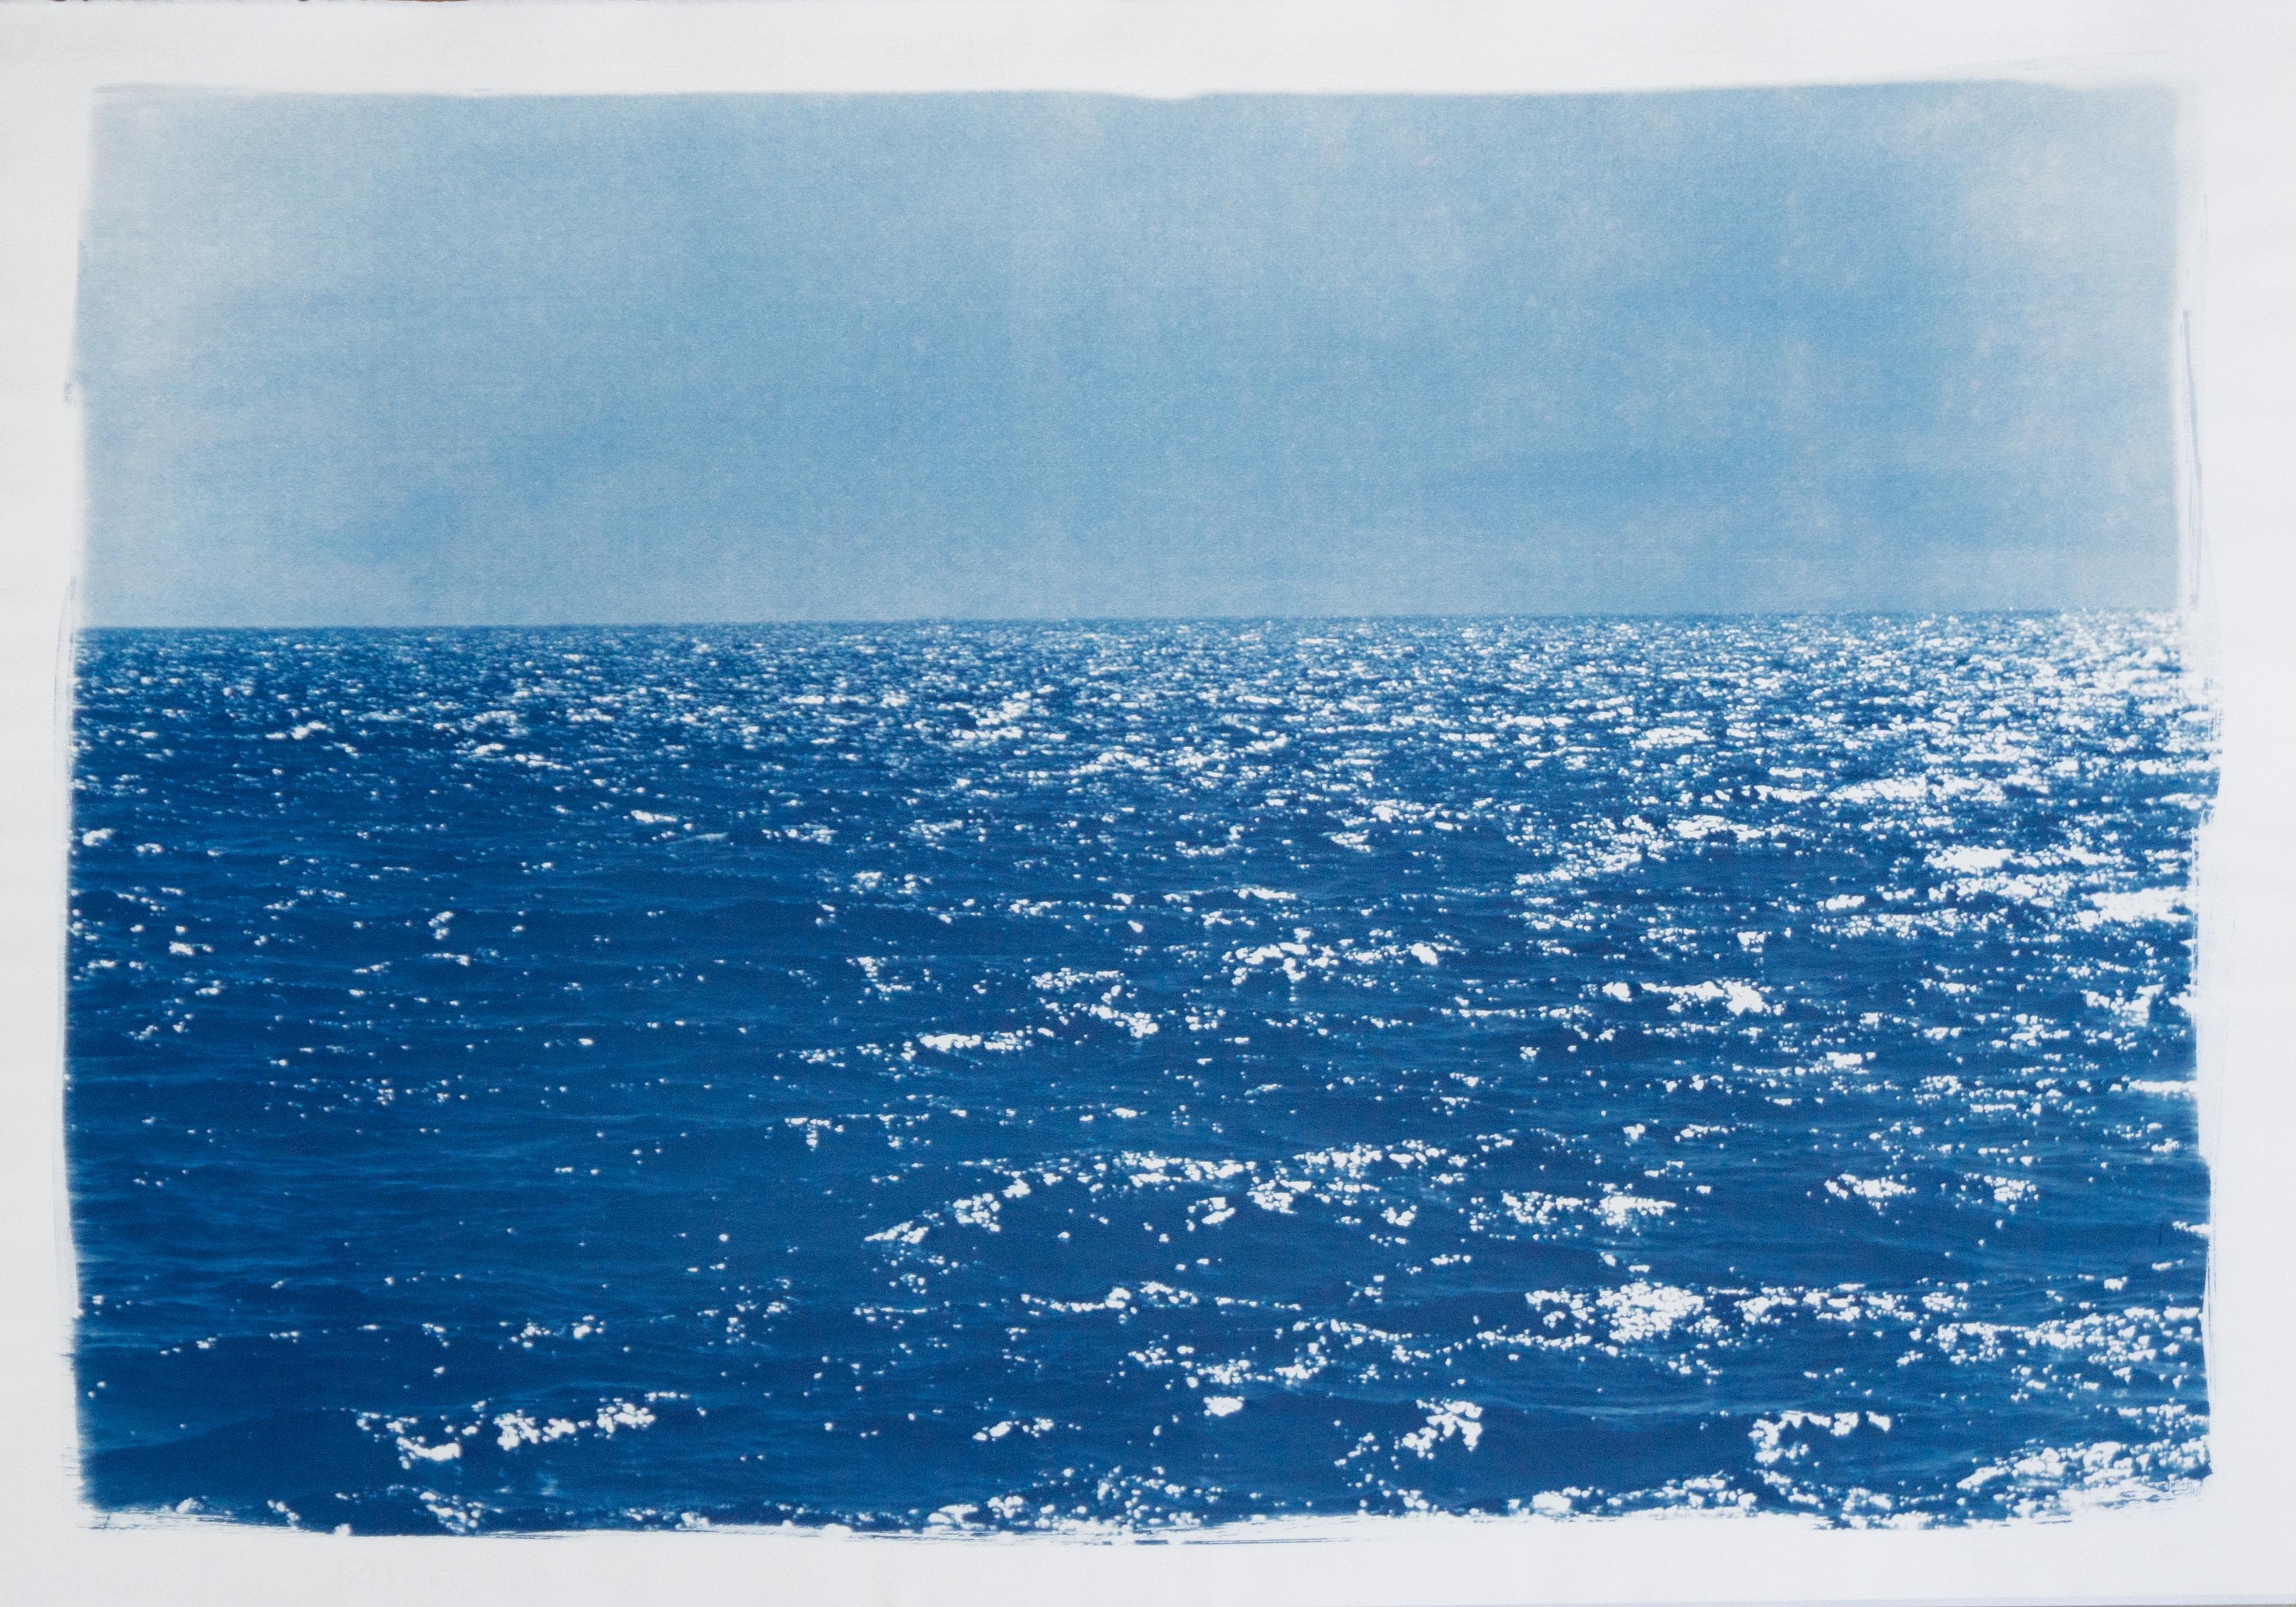 Kind of Cyan Landscape Art - Coastal Blue Cyanotype of Day Time Seascape, Cold Waves, Nautical Painting Shore